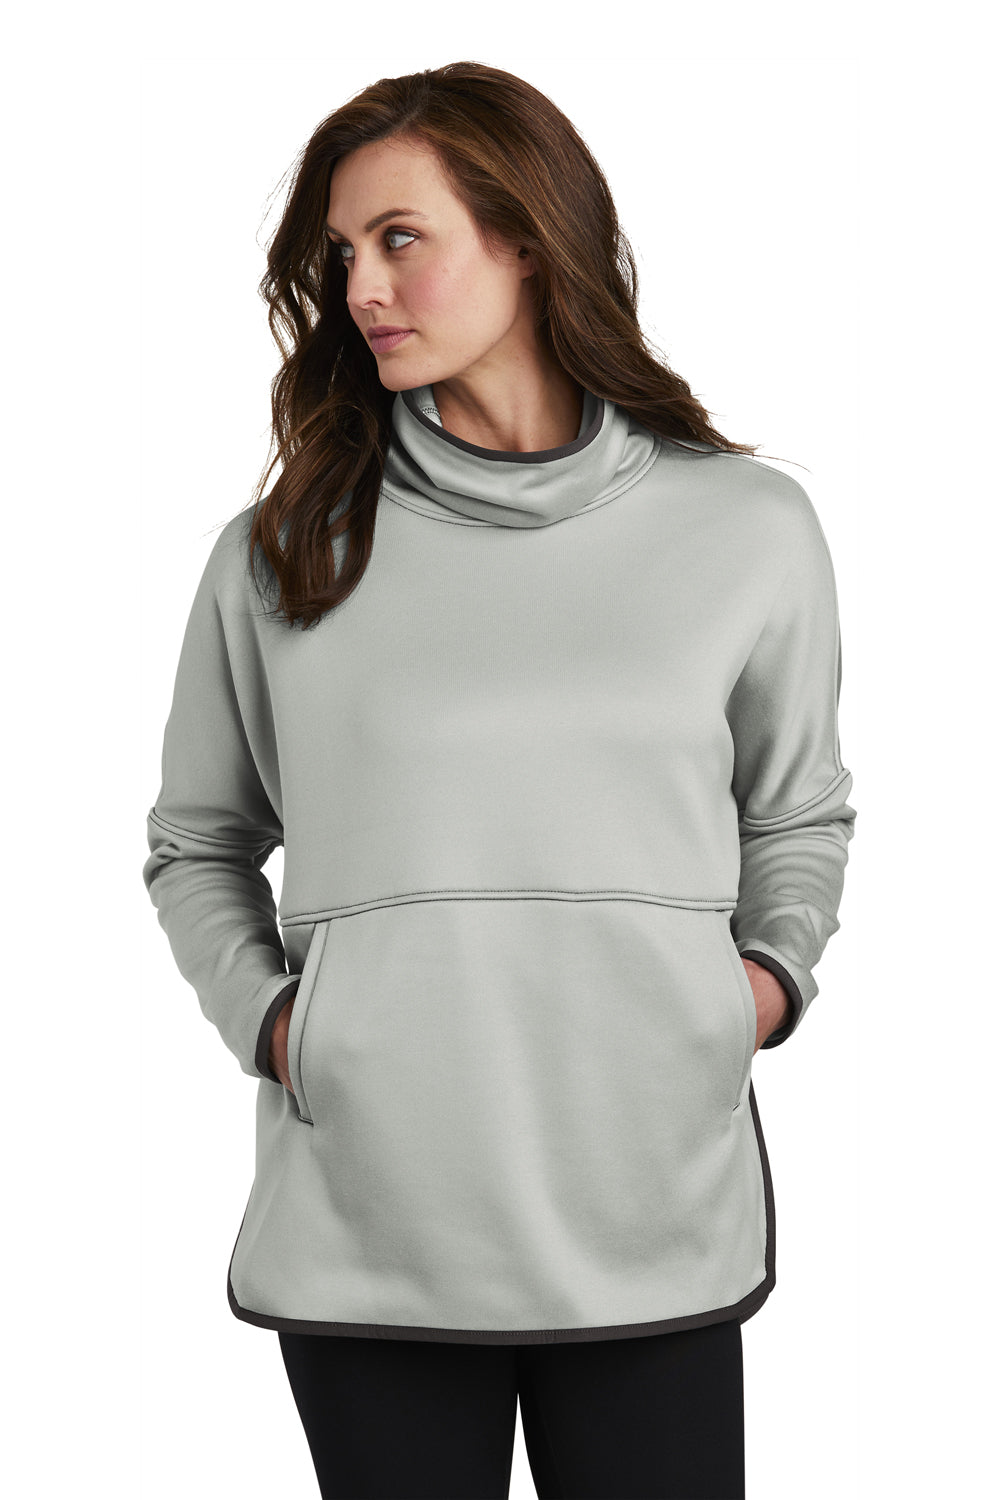 The North Face NF0A3SEF Womens Canyon Flats Fleece Poncho Sweatshirt Heather Grey Front